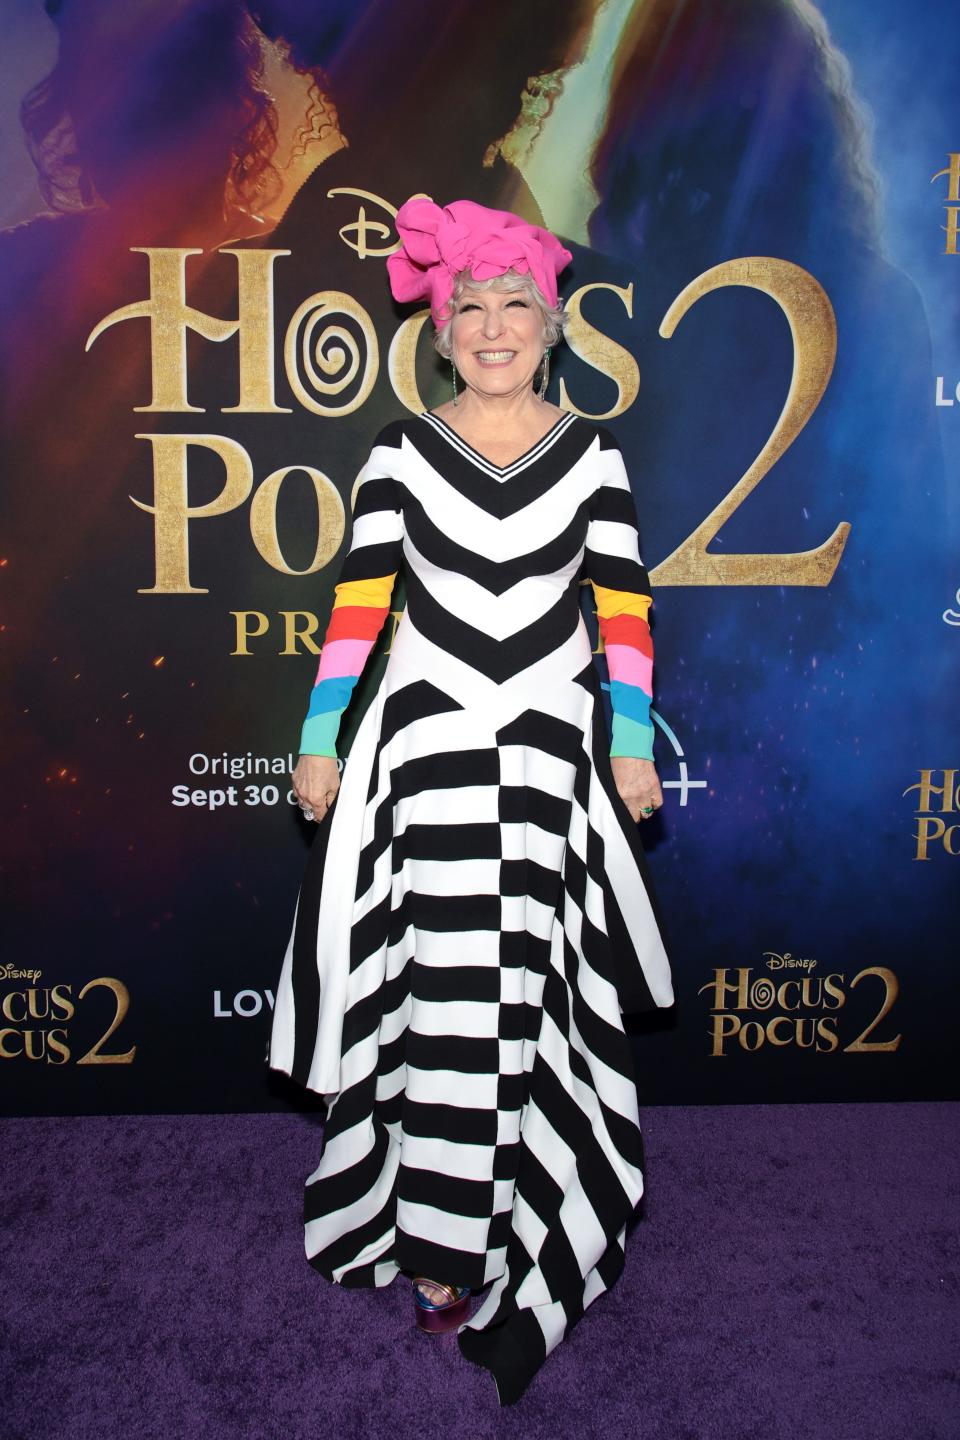 Bette Midler at the premiere of "Hocus Pocus 2" in New York on September 27, 2022.